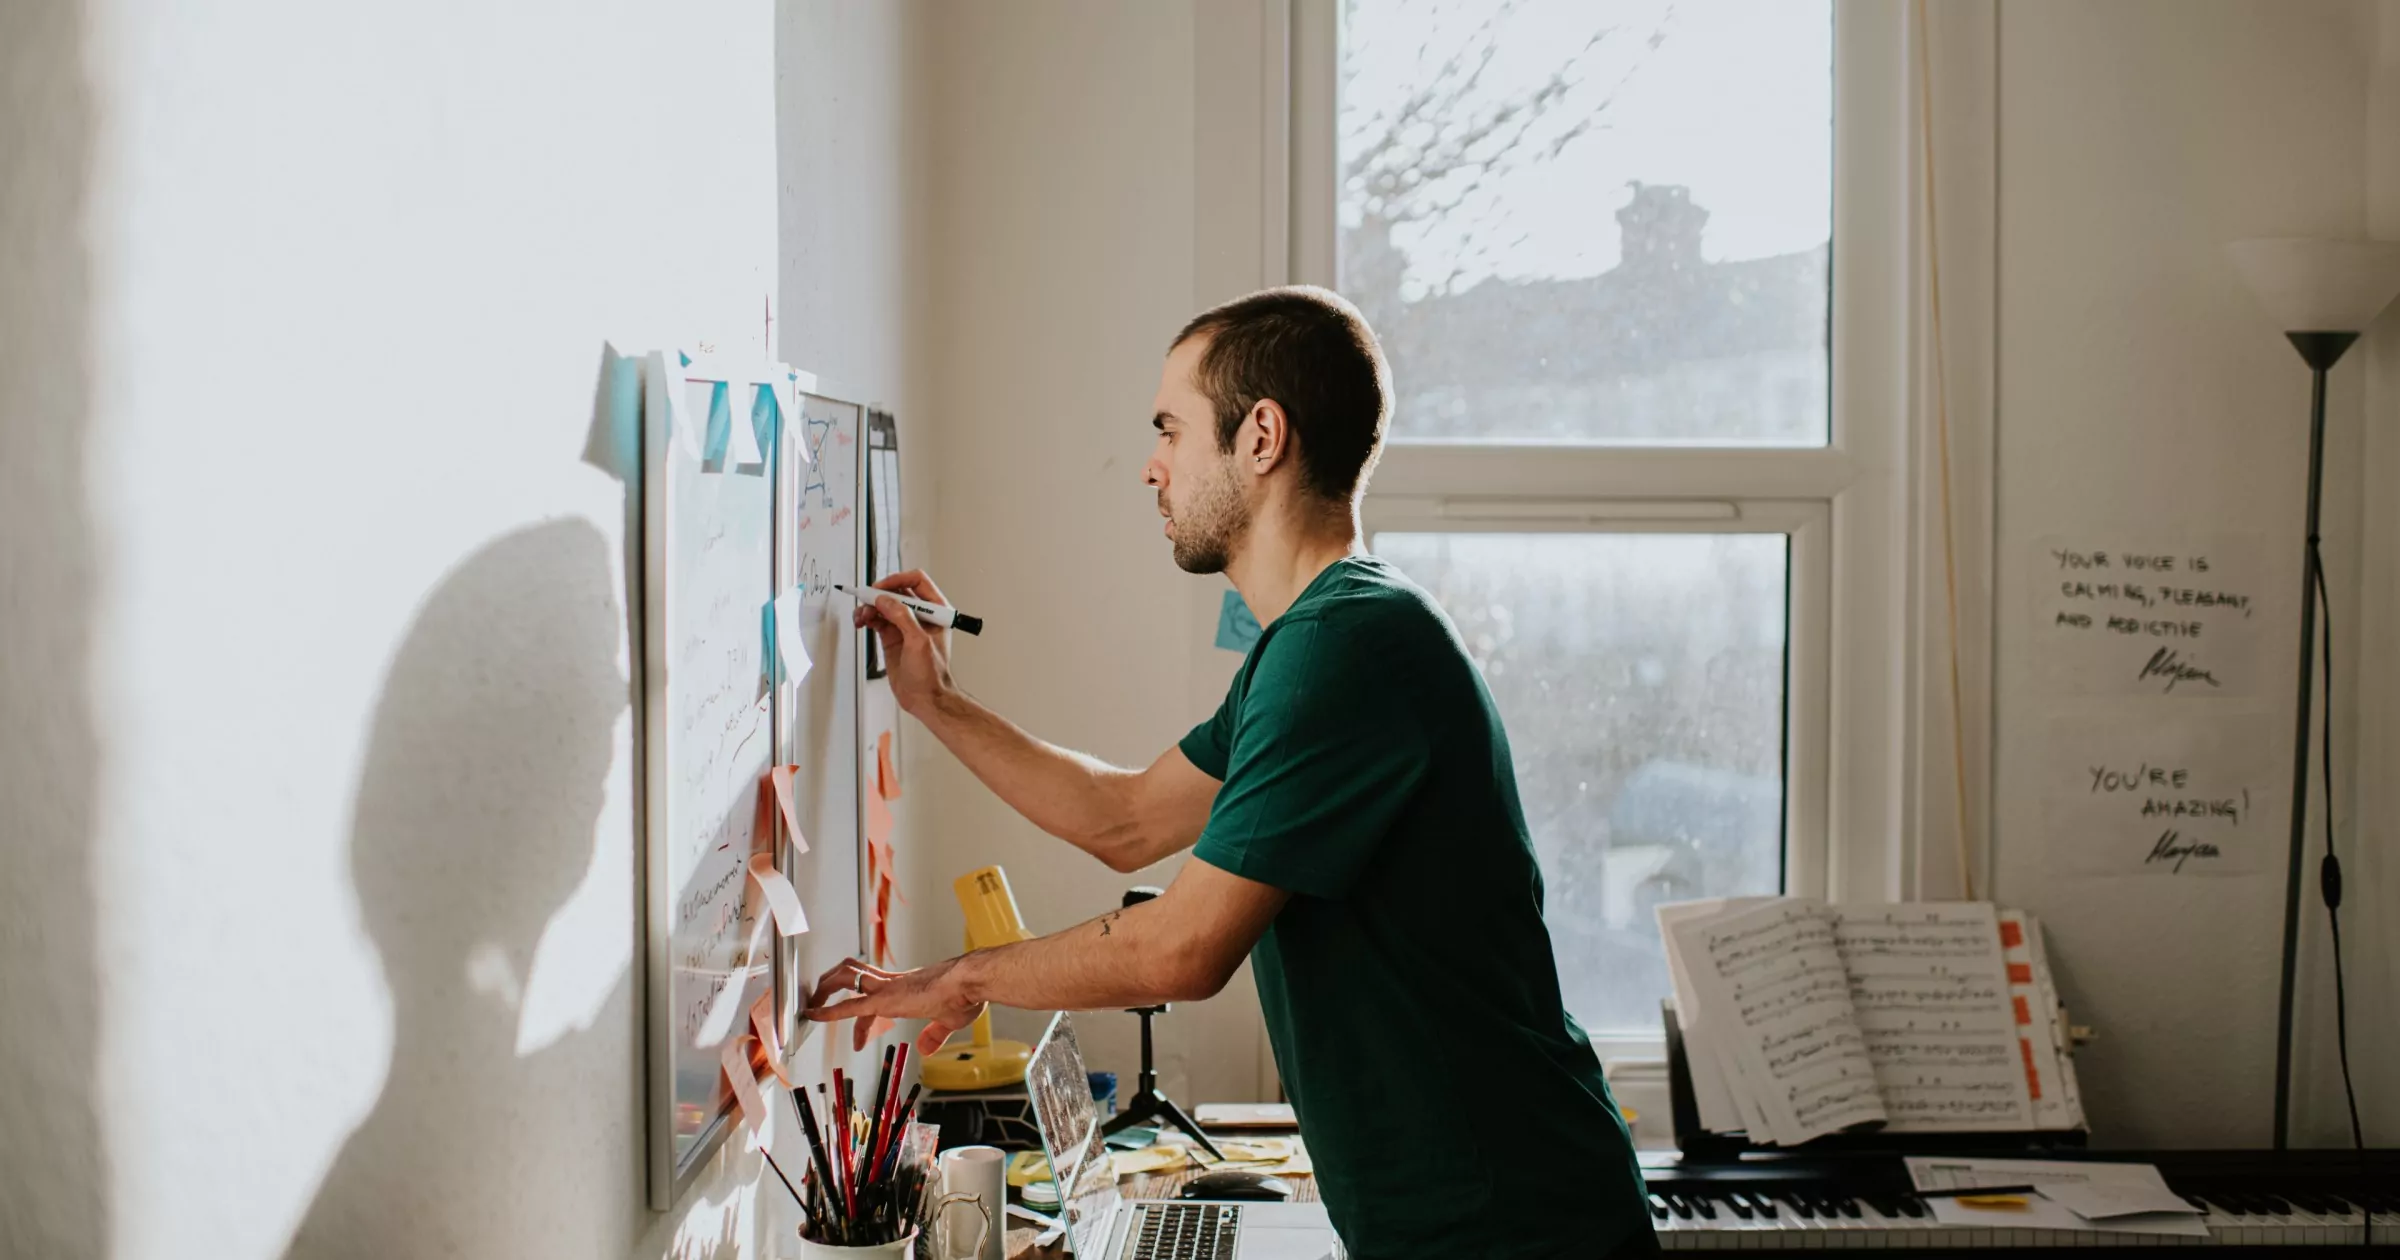 A man leans over a messy desk and writes on a wall-mounted whiteboard in a home-office environment